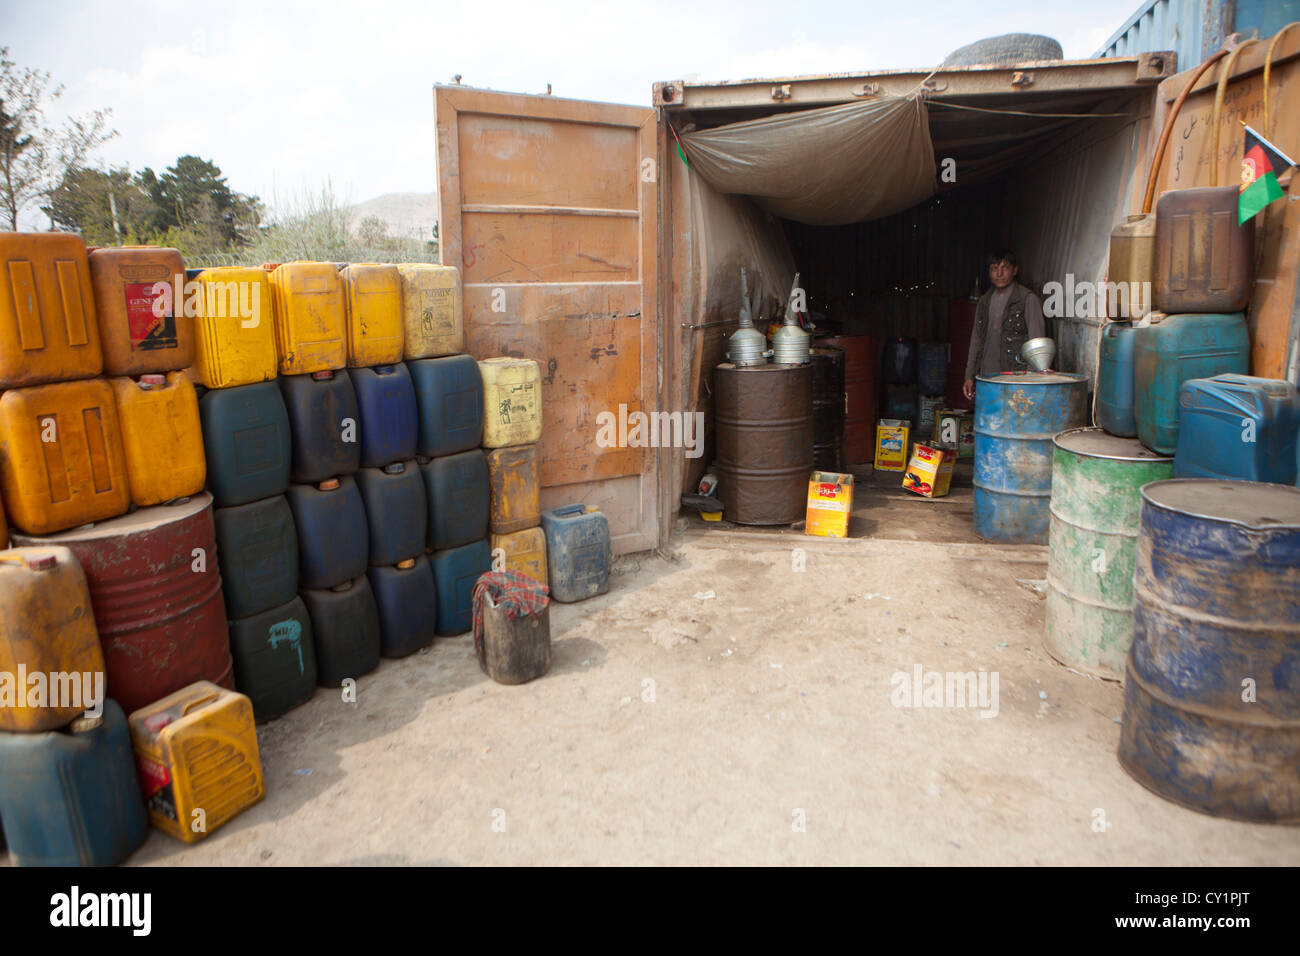 illegal petrol station in kabul Stock Photo